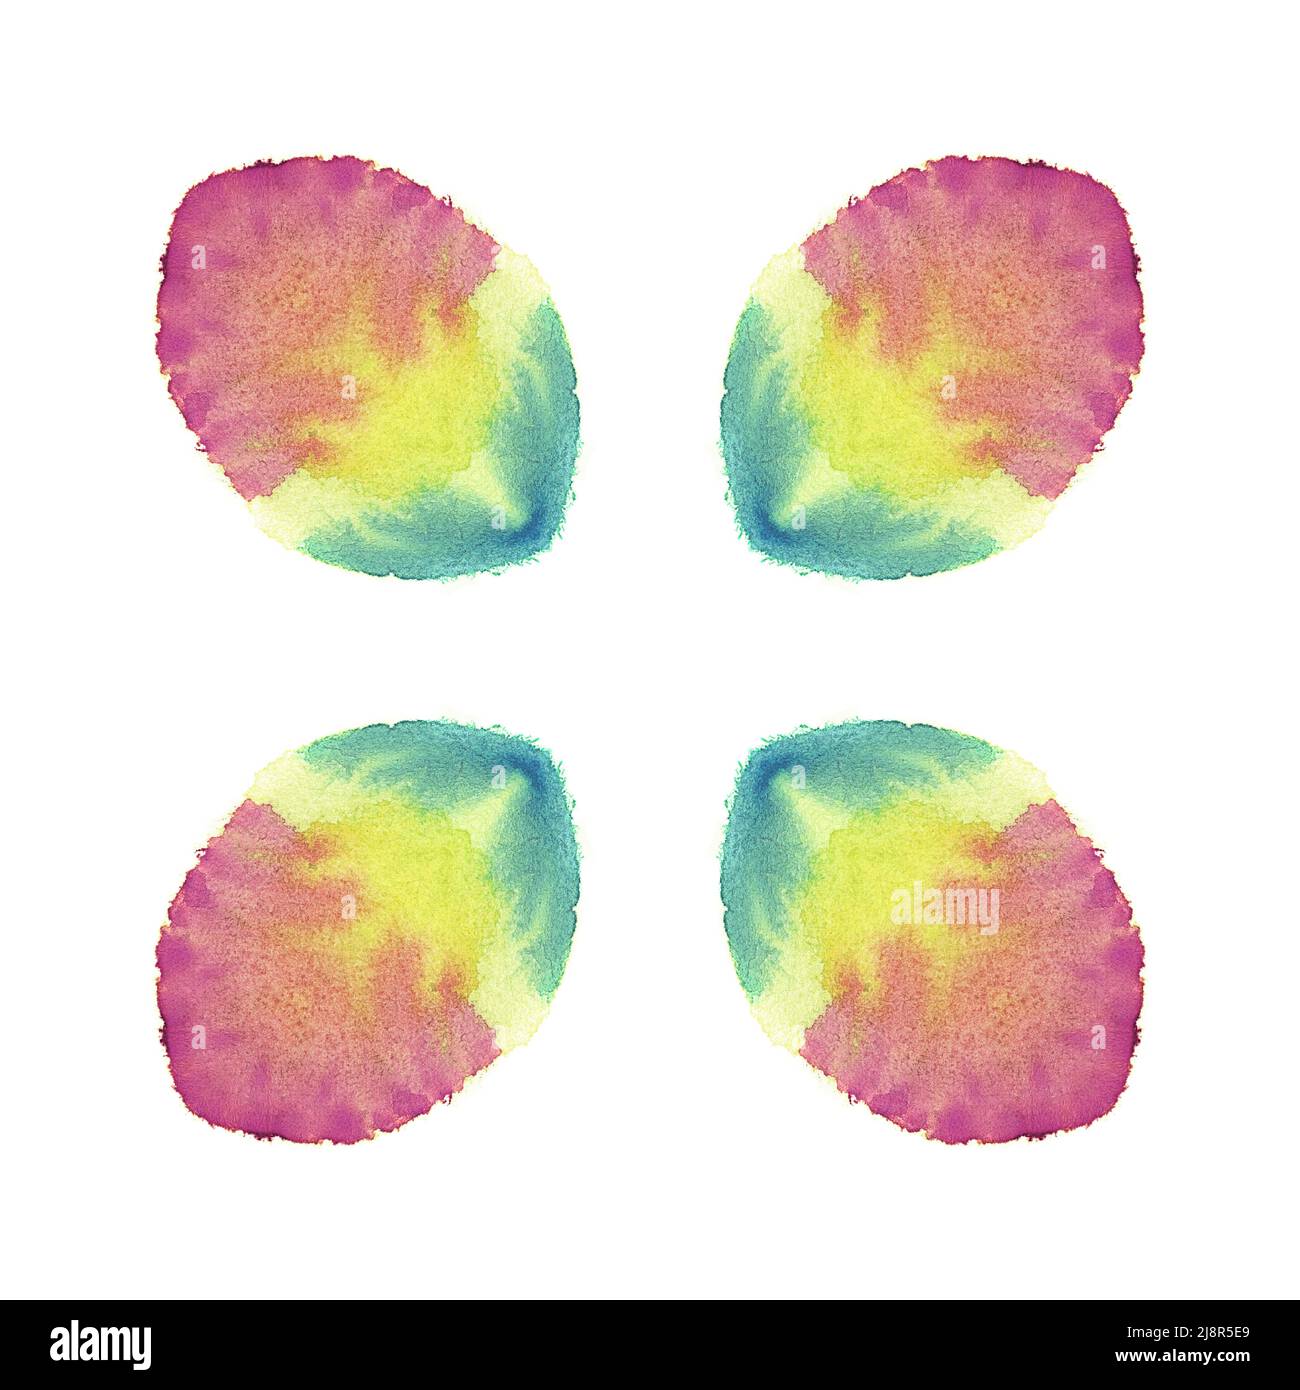 Isolated on white red, yellow and teal watercolor painted oval shape pattern on white paper. Fine abstract multicolor symmetric painting. Symmetrical Stock Photo